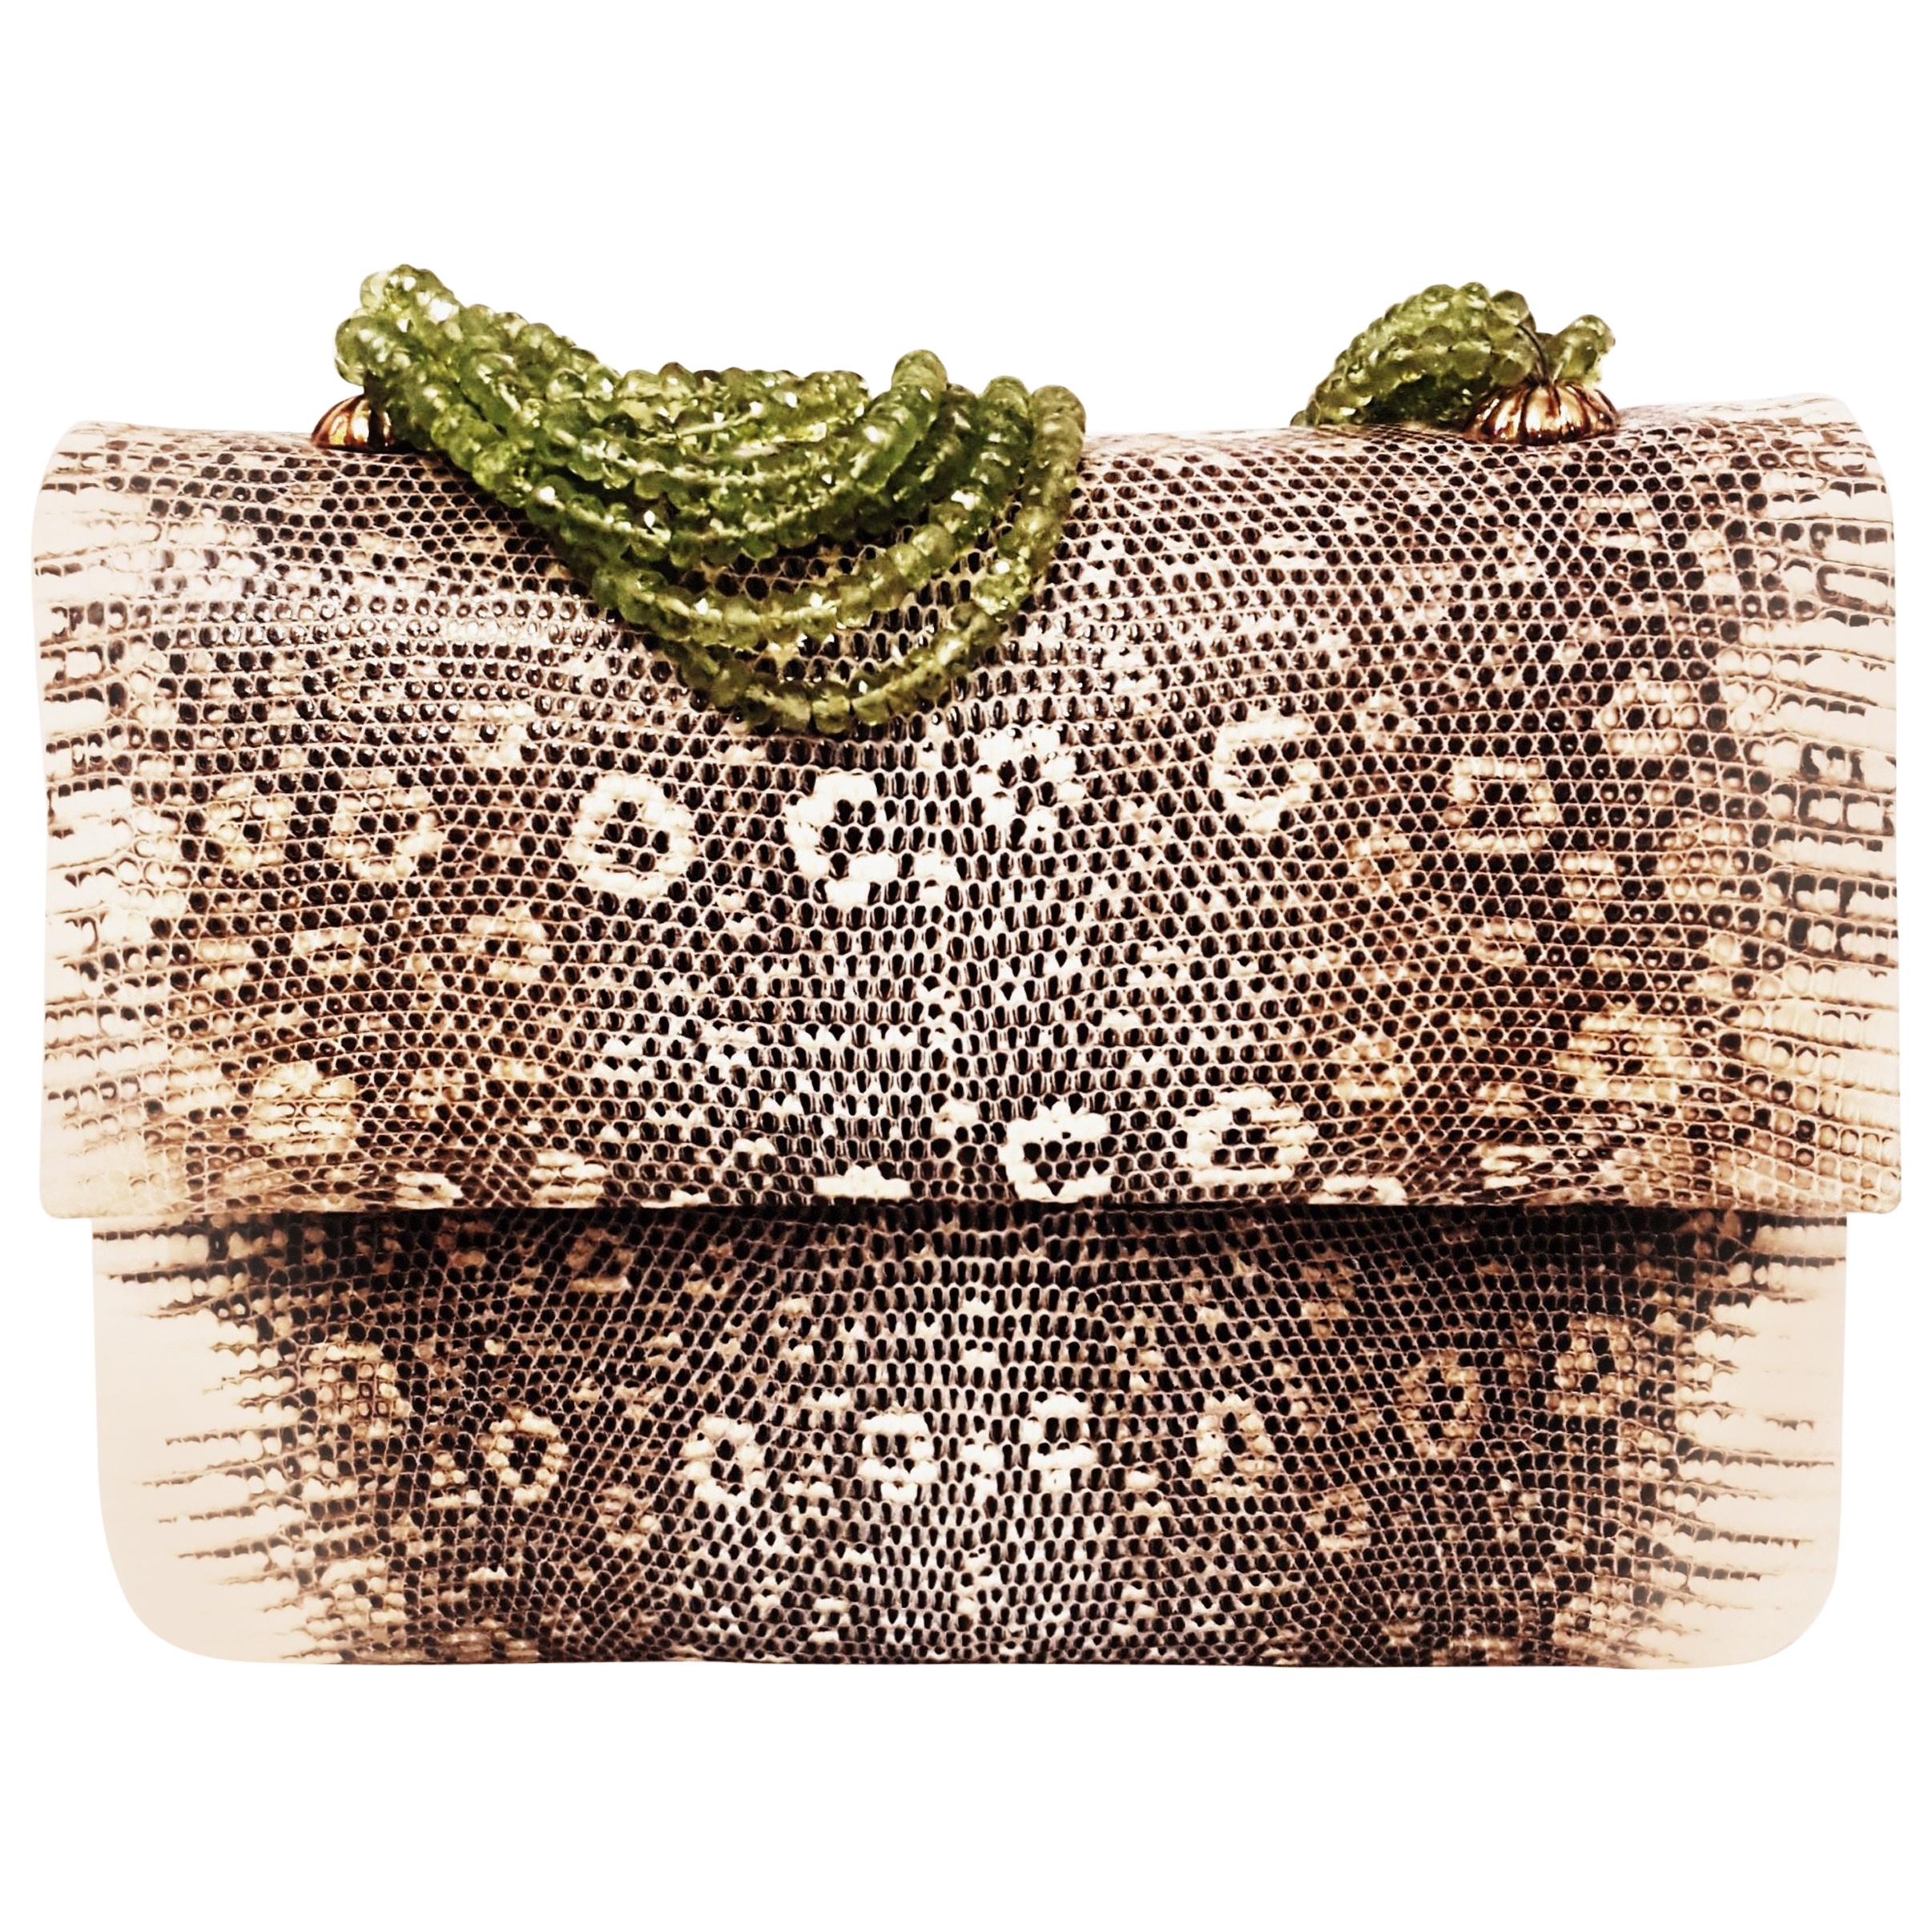 Darby Scott Lizard Evening Bag With Peridot Strands For Sale